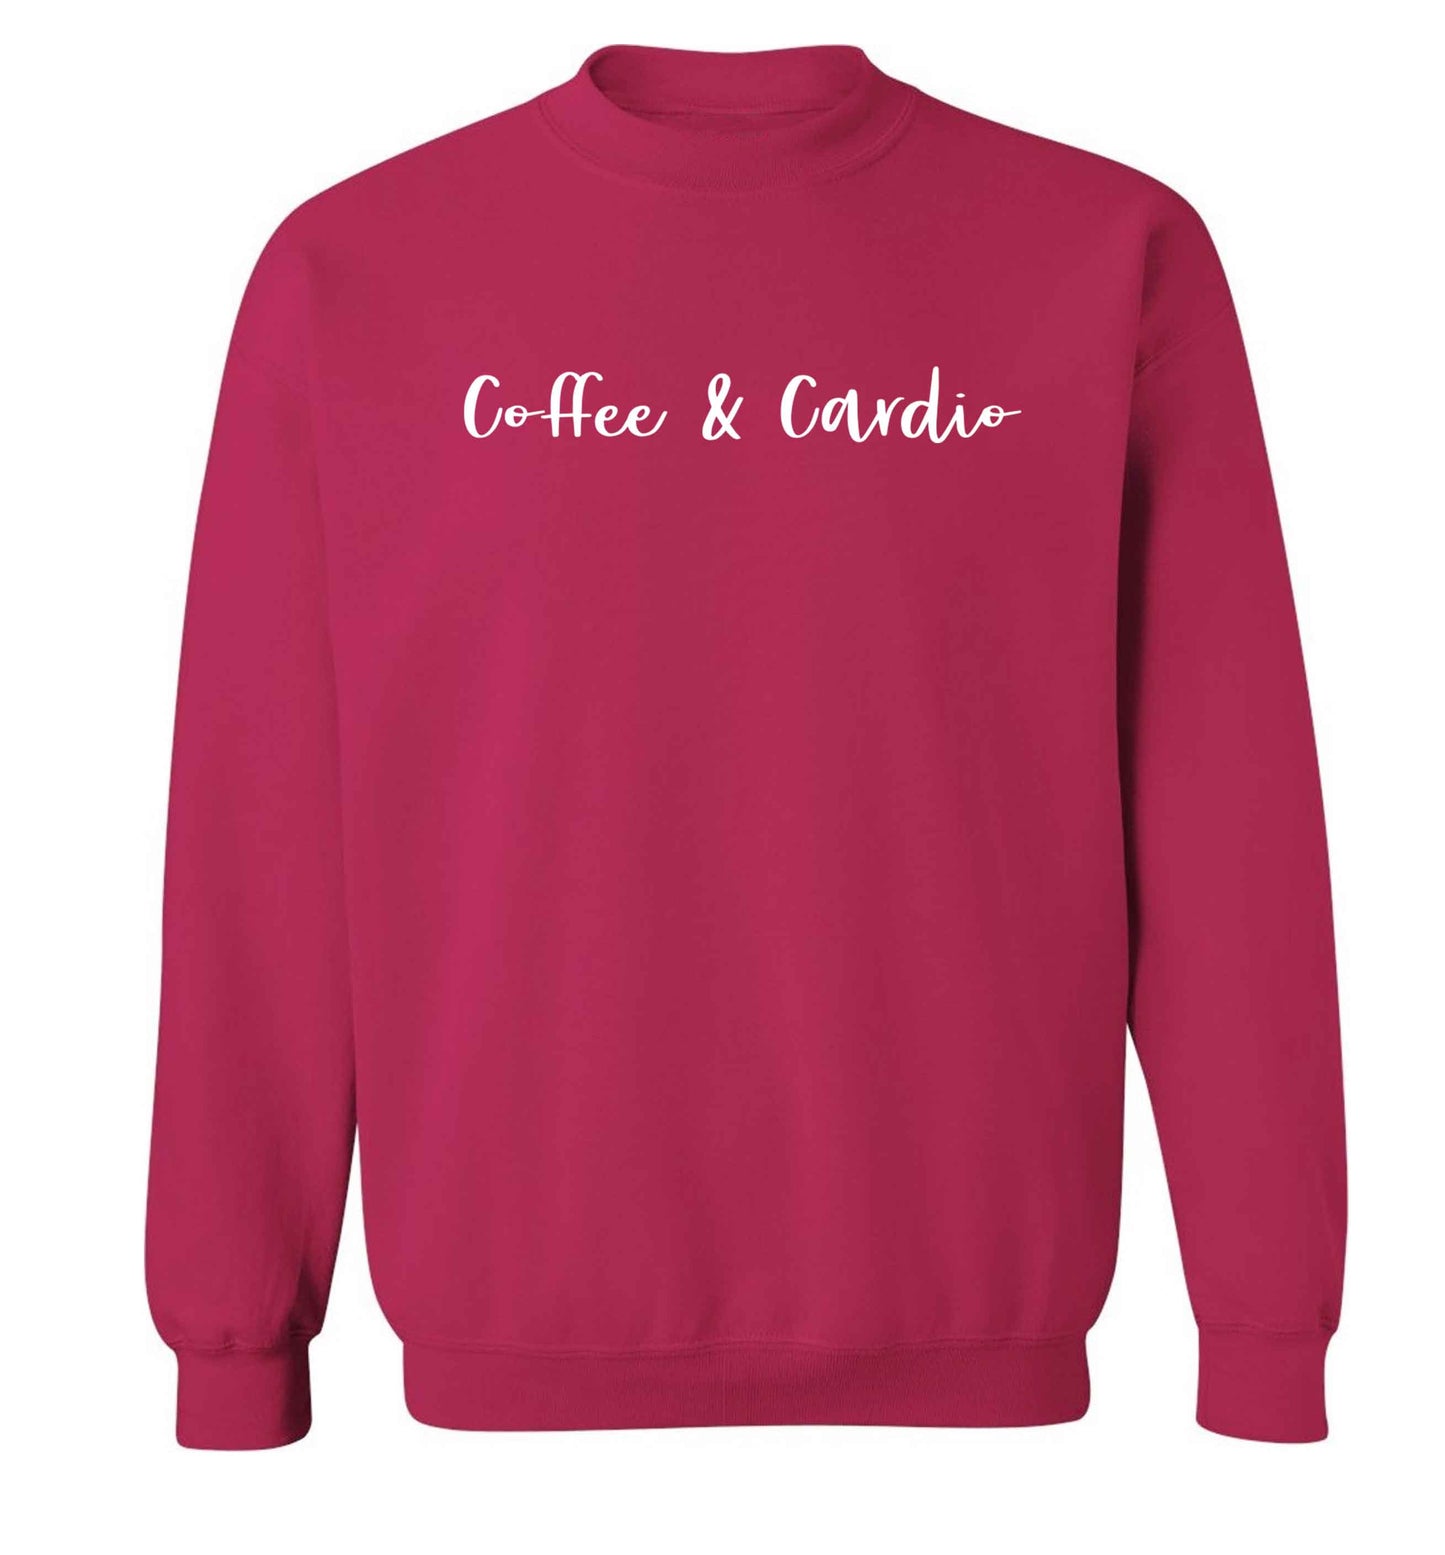 Coffee and cardio Adult's unisex pink Sweater 2XL